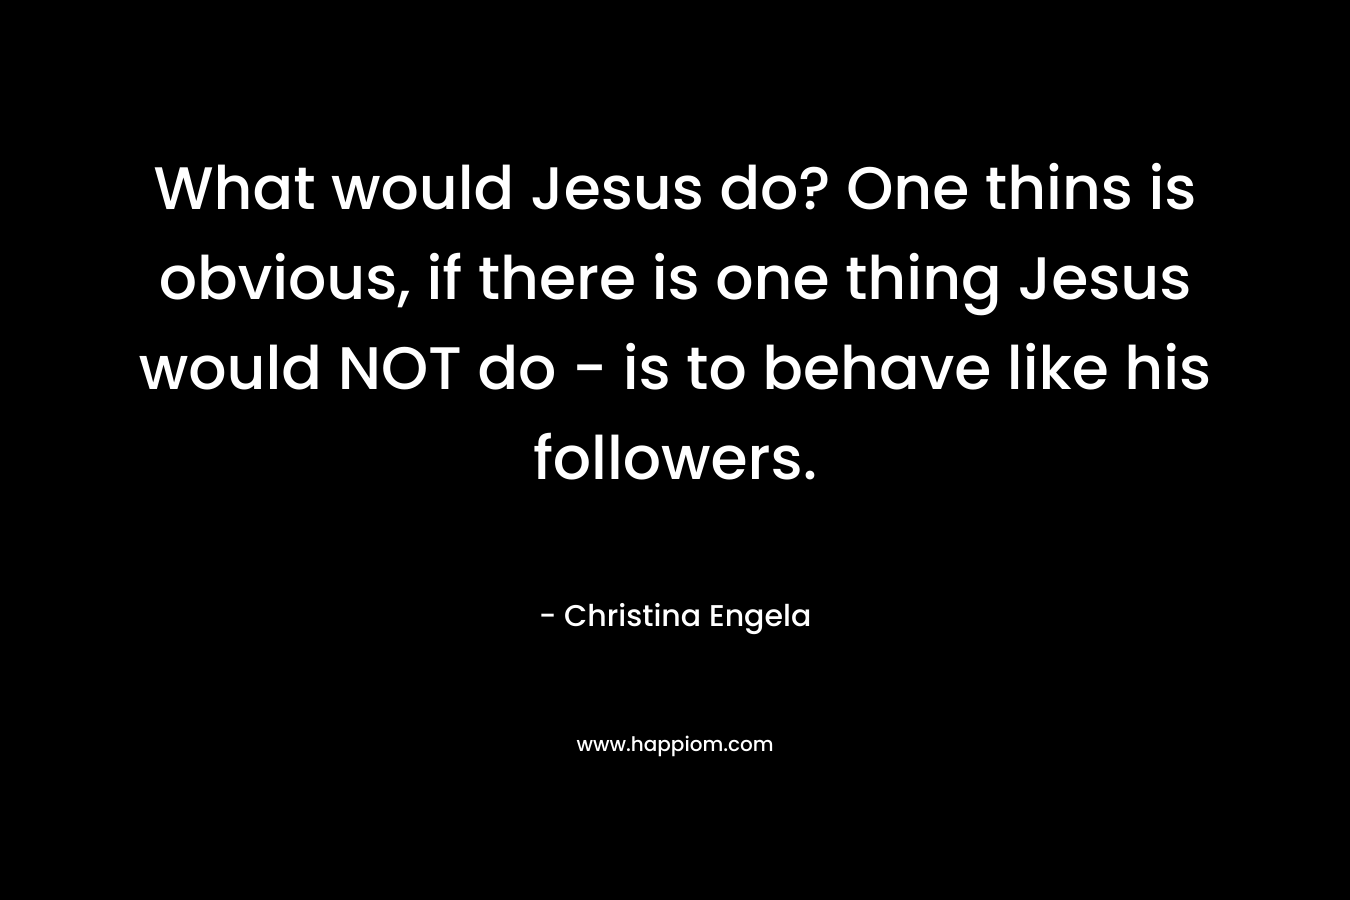 What would Jesus do? One thins is obvious, if there is one thing Jesus would NOT do - is to behave like his followers.